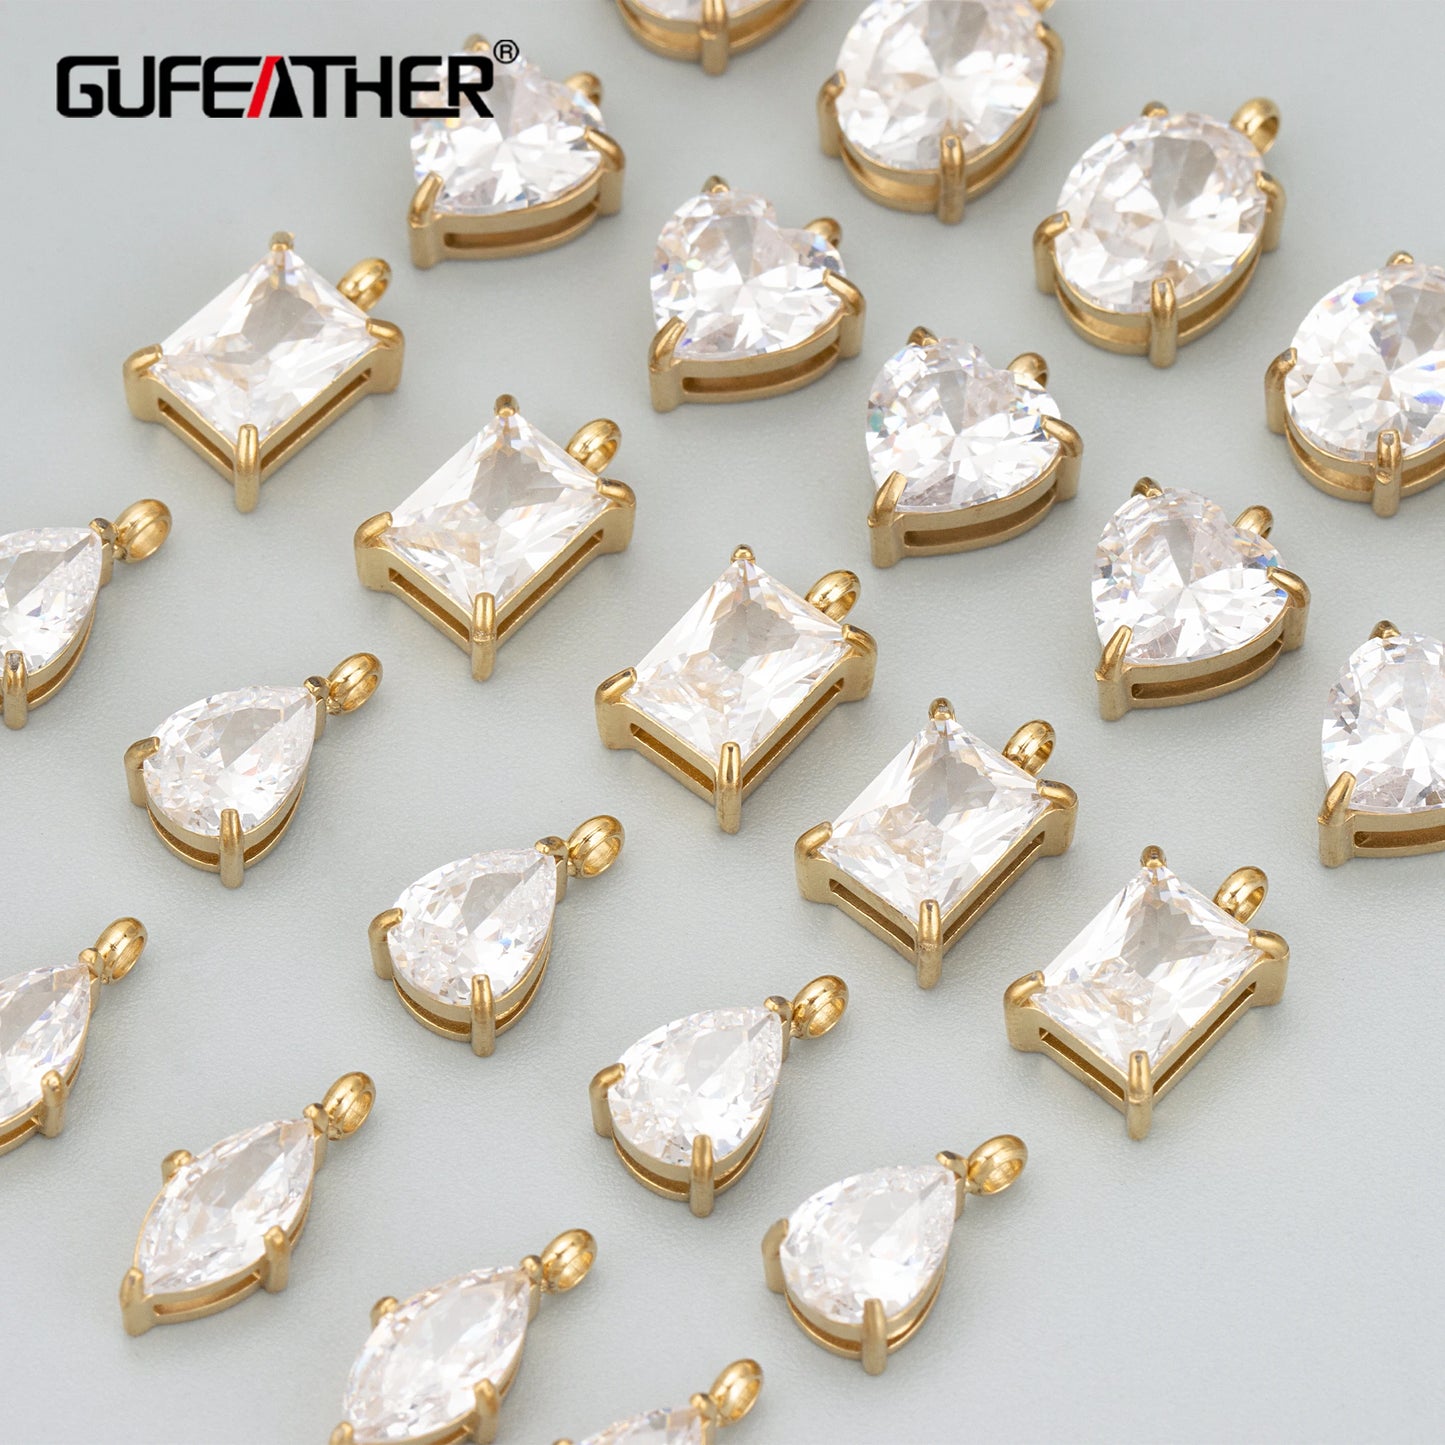 GUFEATHER ME26,jewelry accessories,316L stainless steel,nickel free,zircon,hand made,charms,diy pendants,jewelry making,2pcs/lot